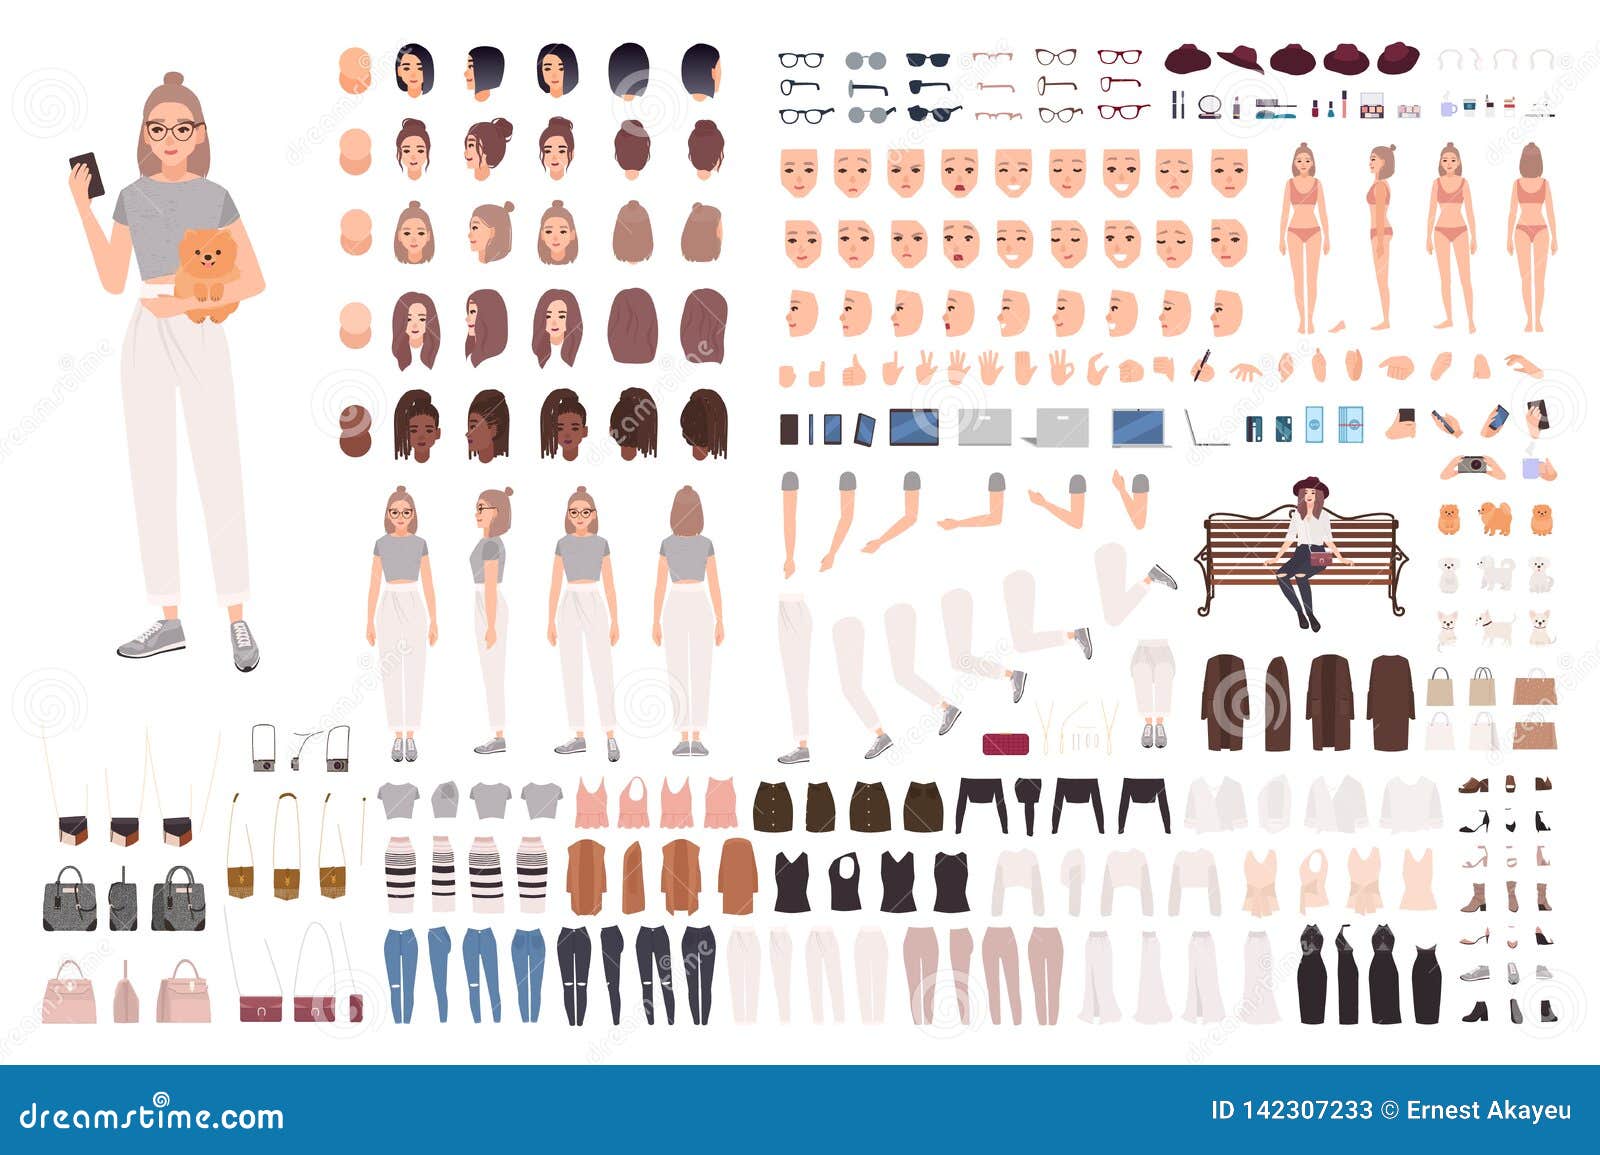 stylish young woman animation set or constructor kit. collection of body parts, gestures, trendy clothes and accessories